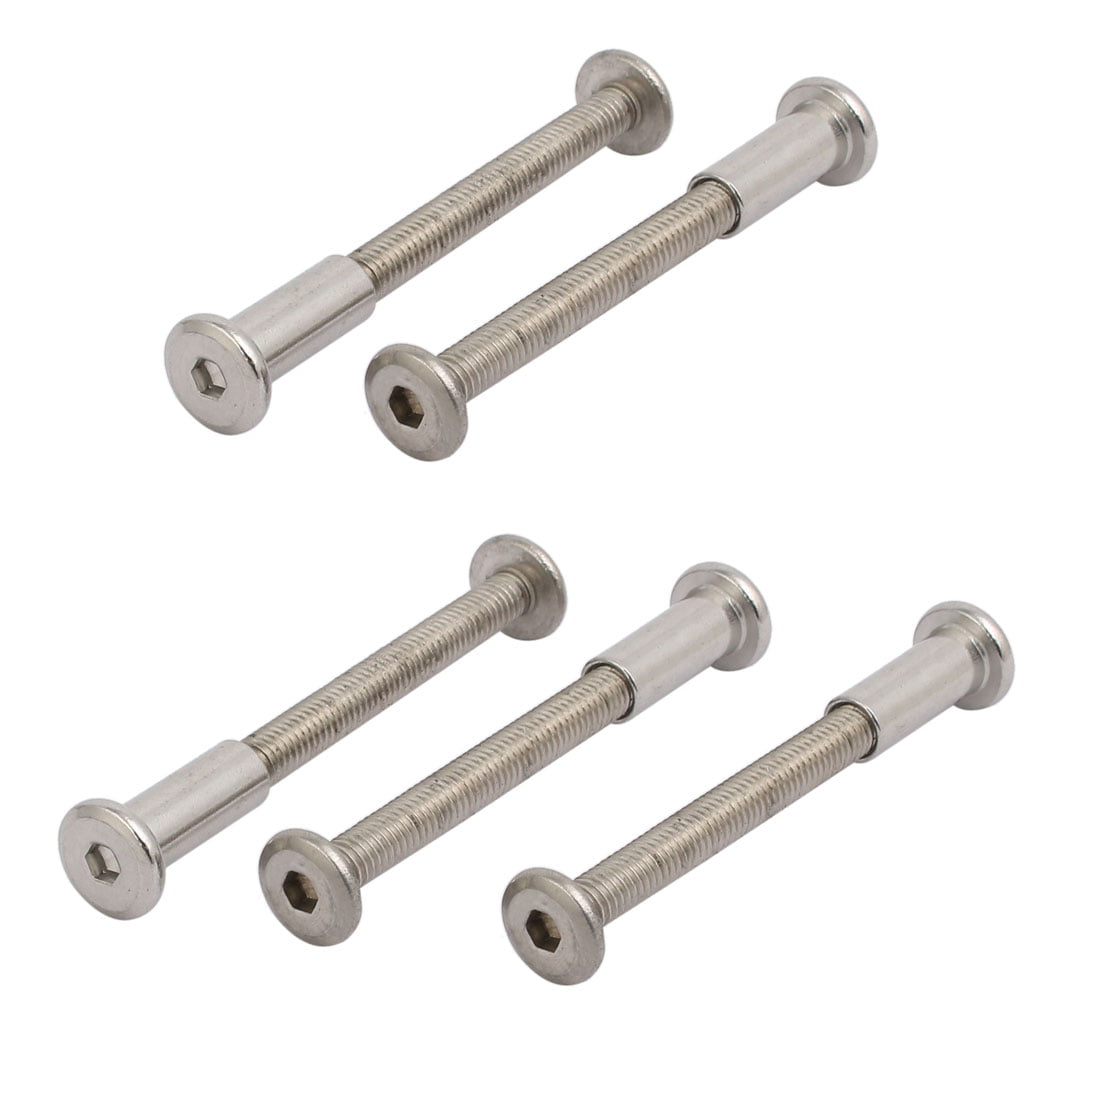 Female 9 Length, Stainless Steel Round Standoff Pack of 1 0.5 OD 1/4-20 Screw Size 